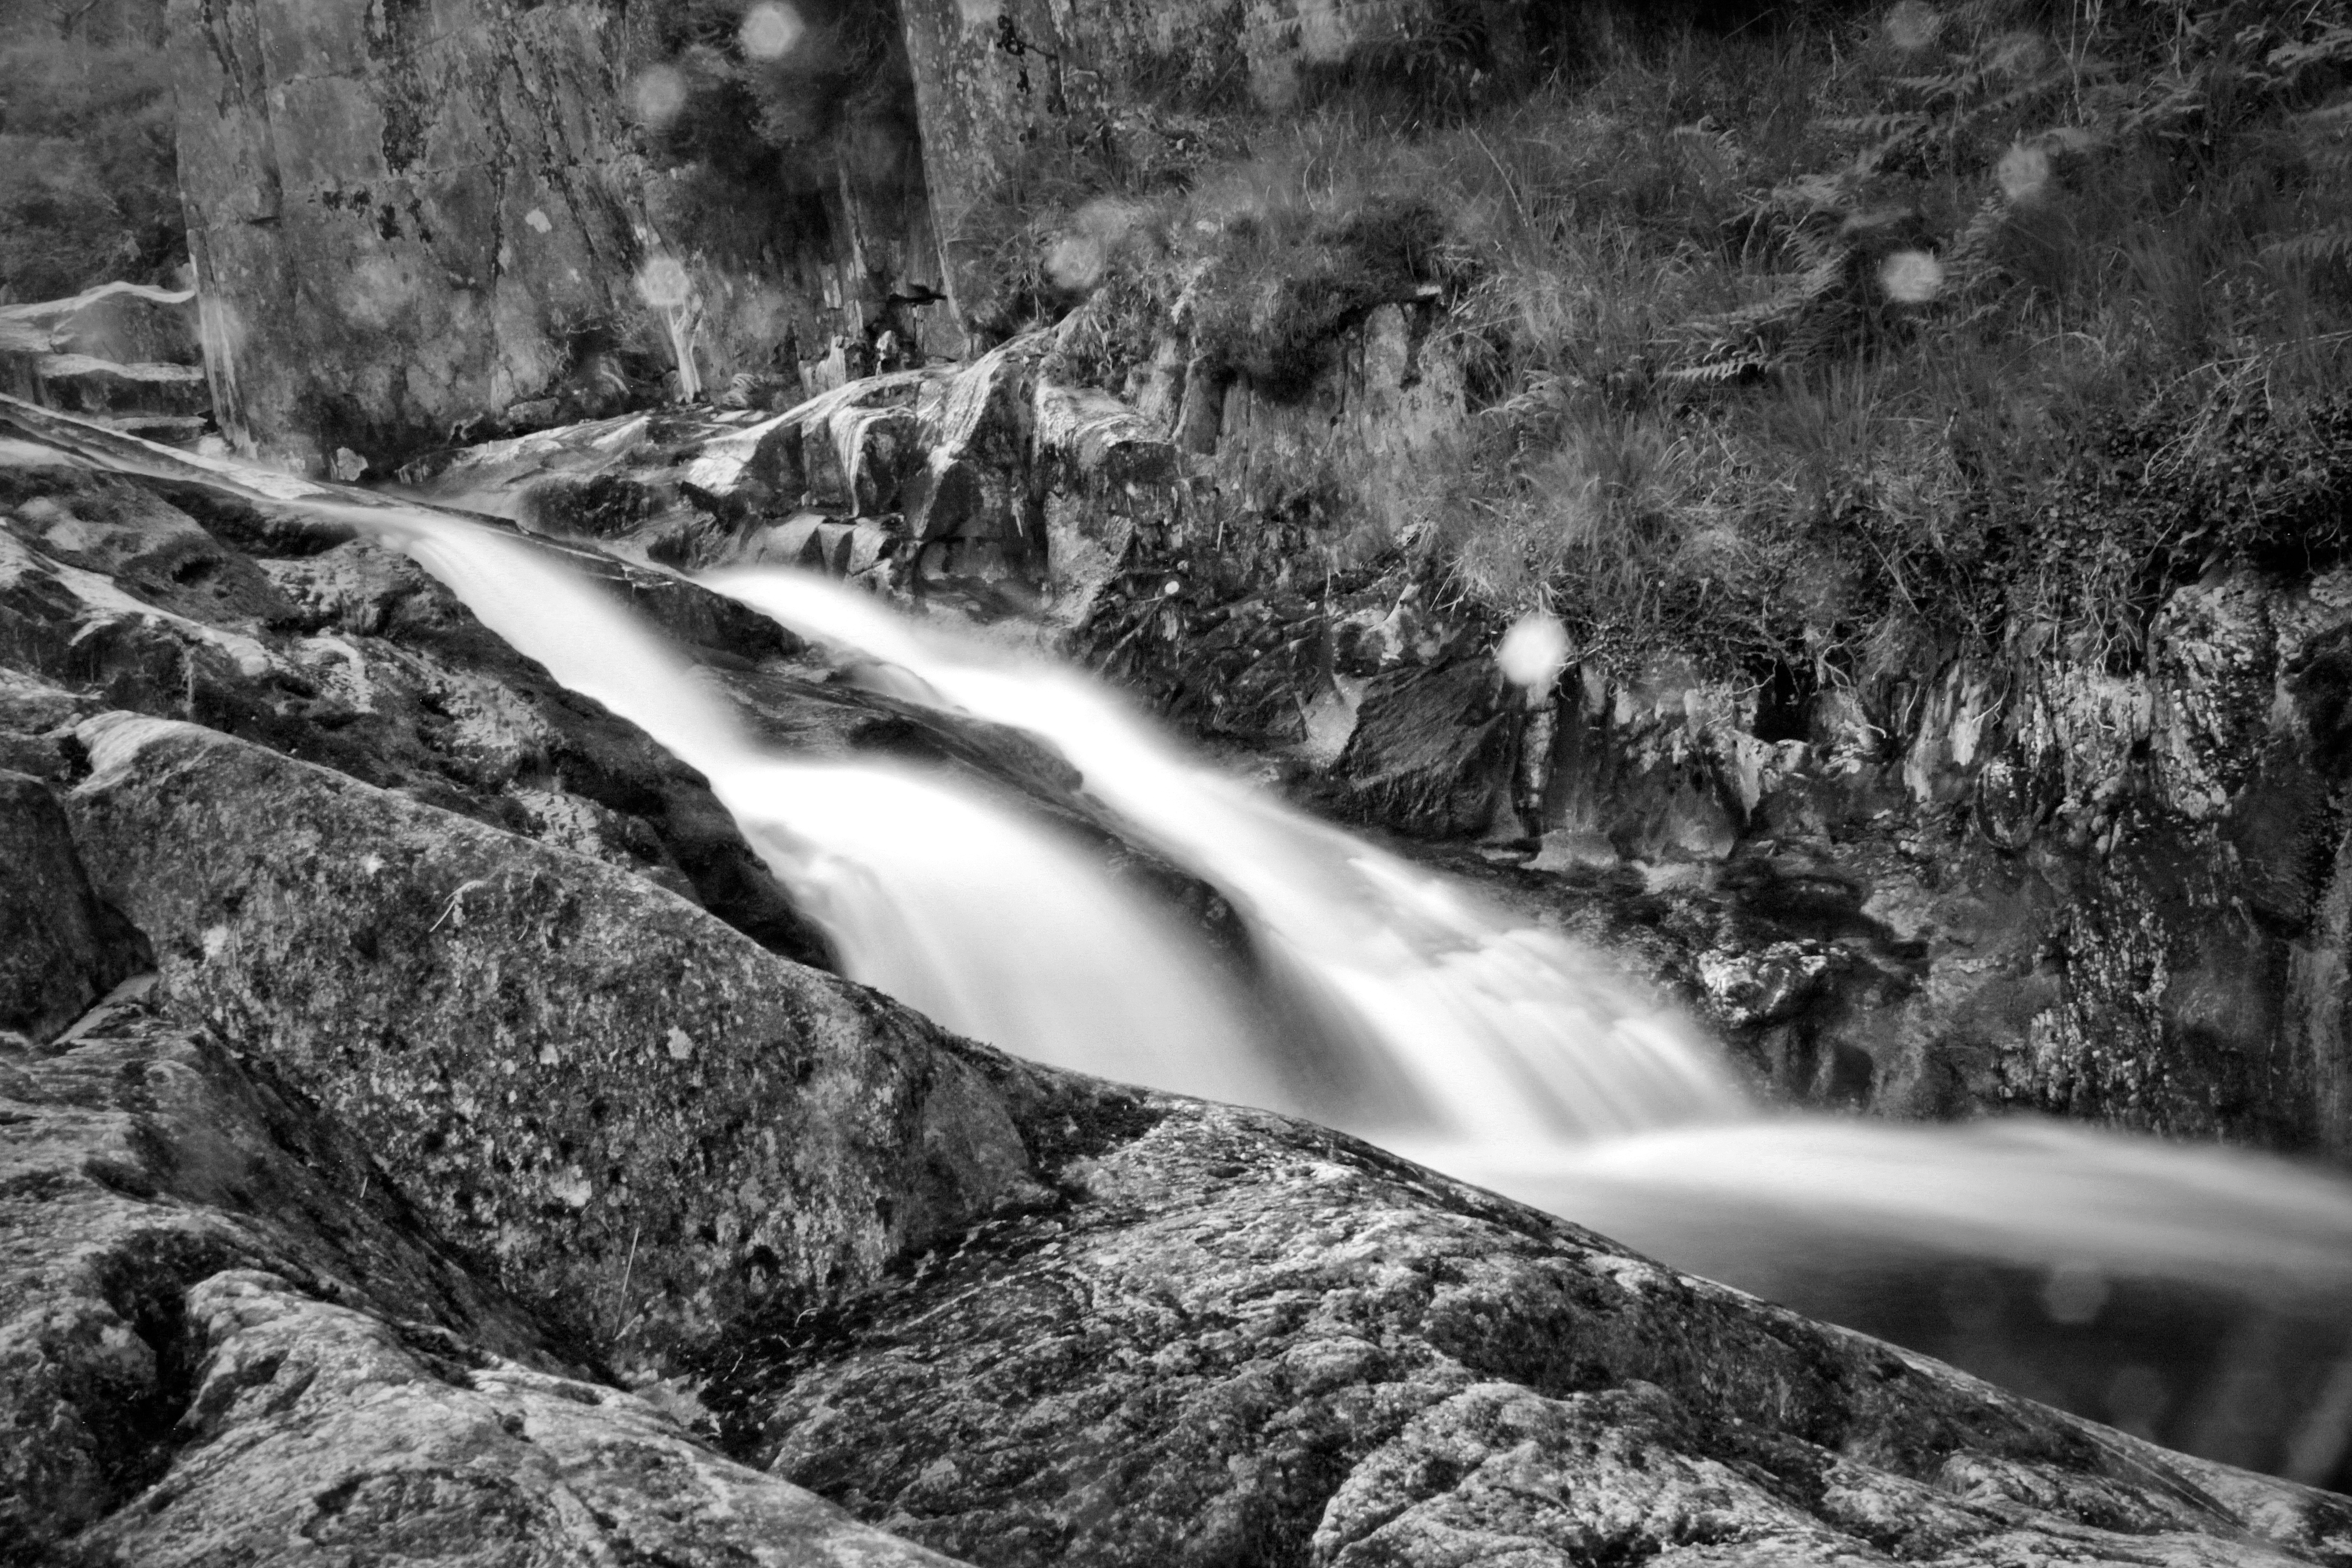 Long exposure at the waterfalls on the Watkin Path.